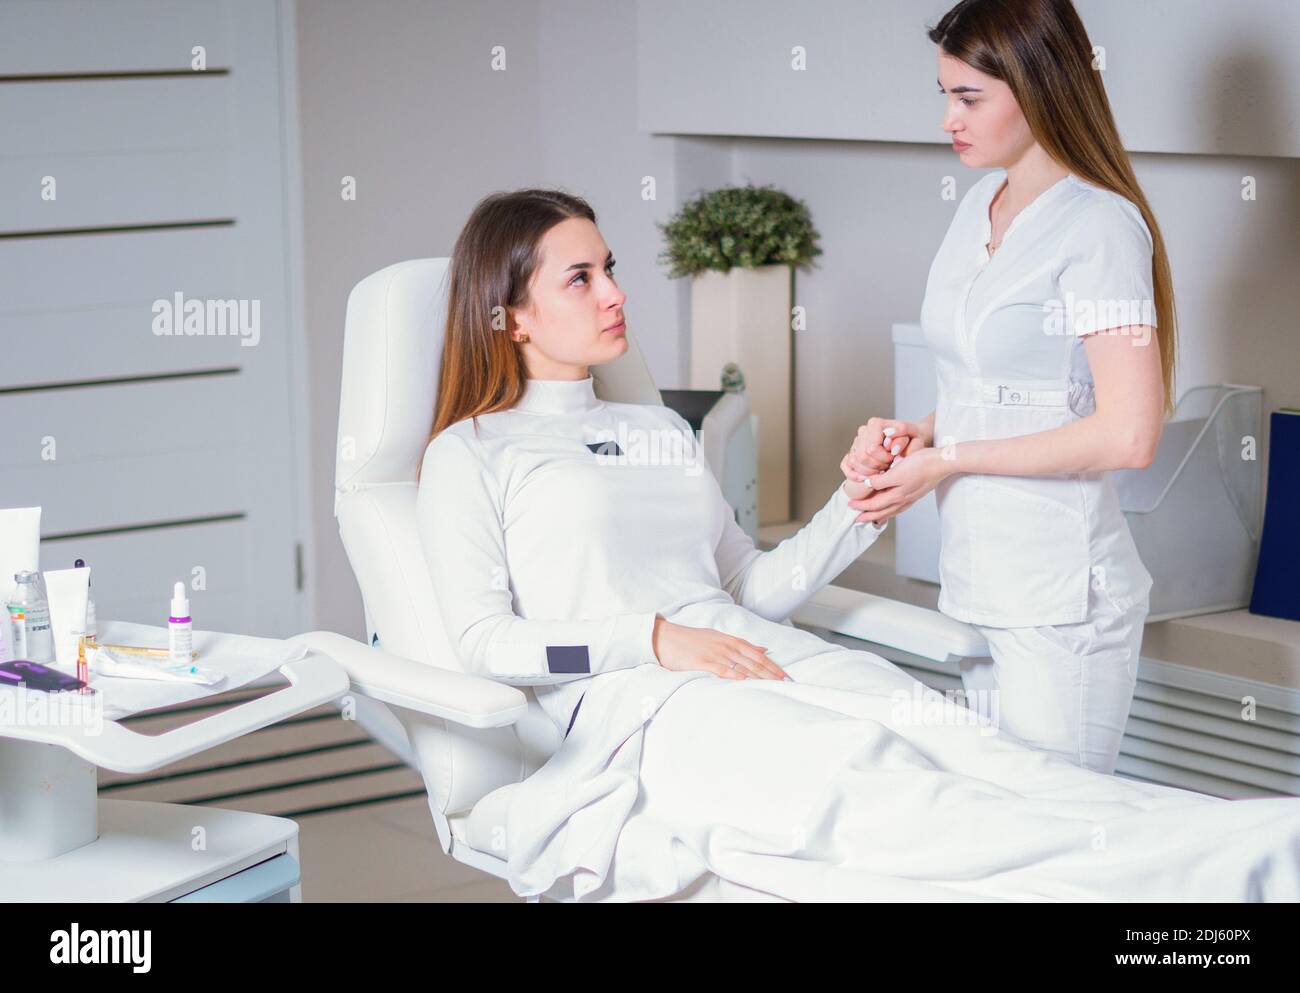 Young pretty woman came to a beauty salon and consults with a beautician on anti-aging treatments. Stock Photo